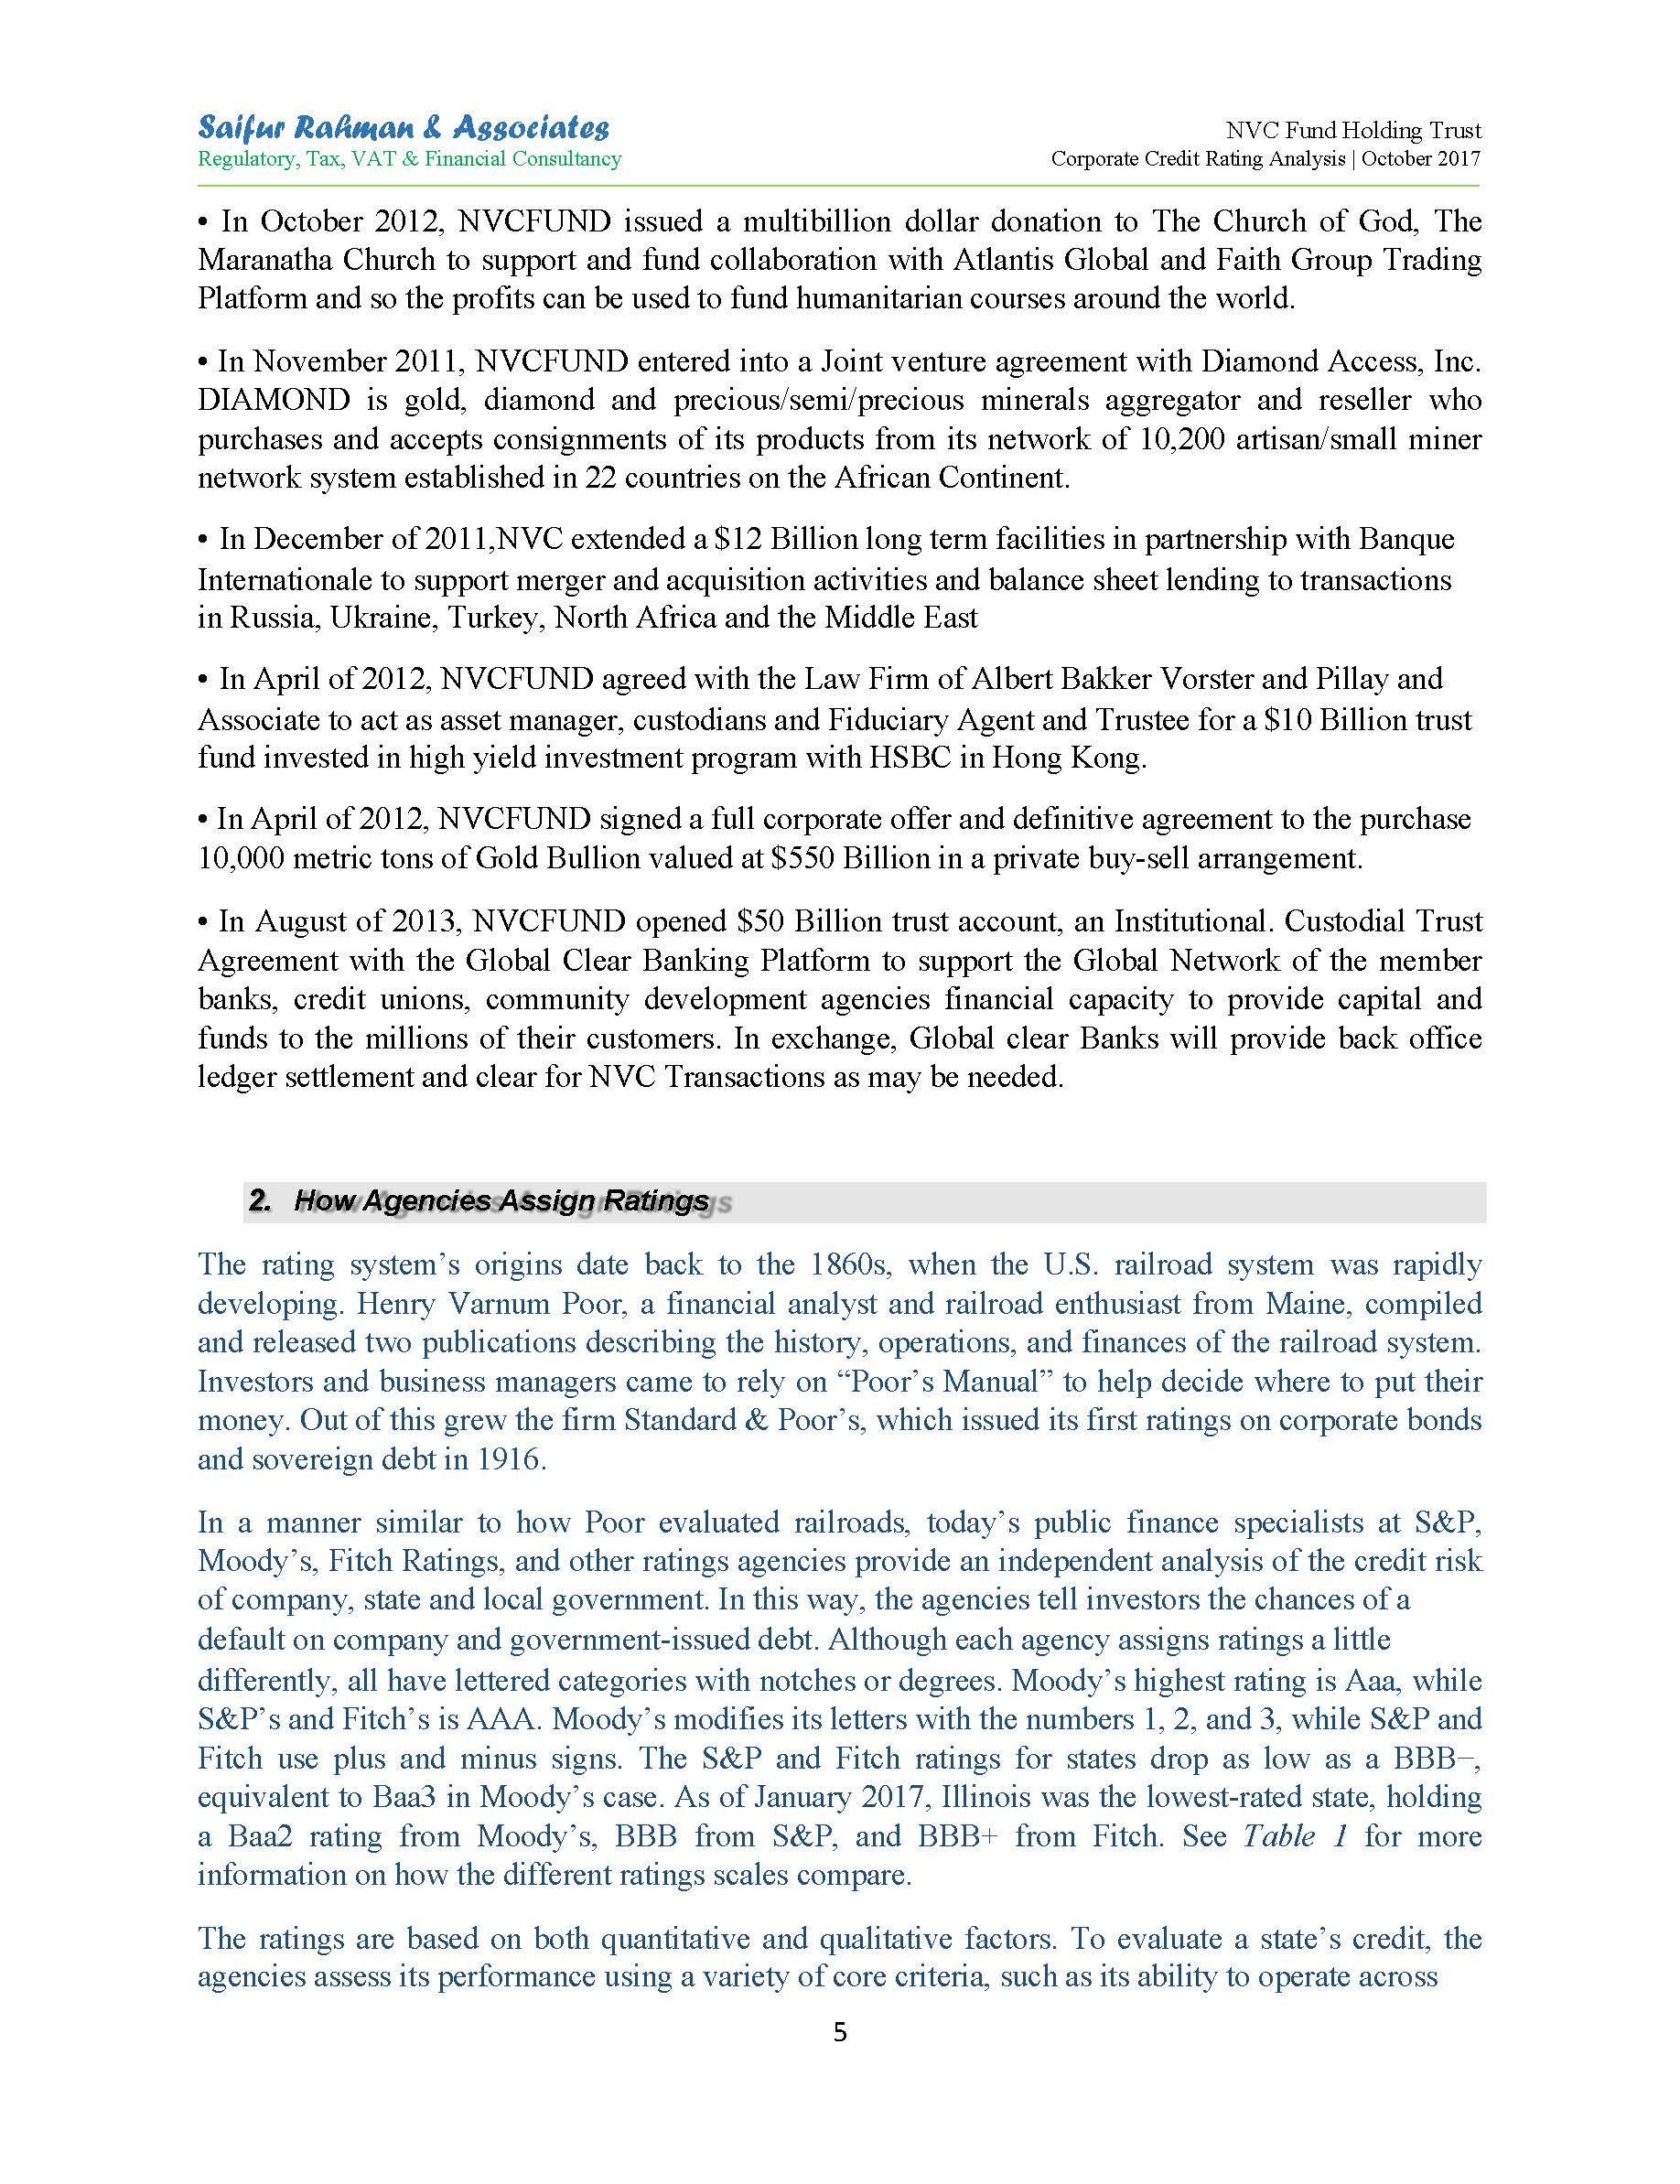 NVC_FUND HOLDINGS_CREDIT_RATING REPORT (1)_Page_07.jpg